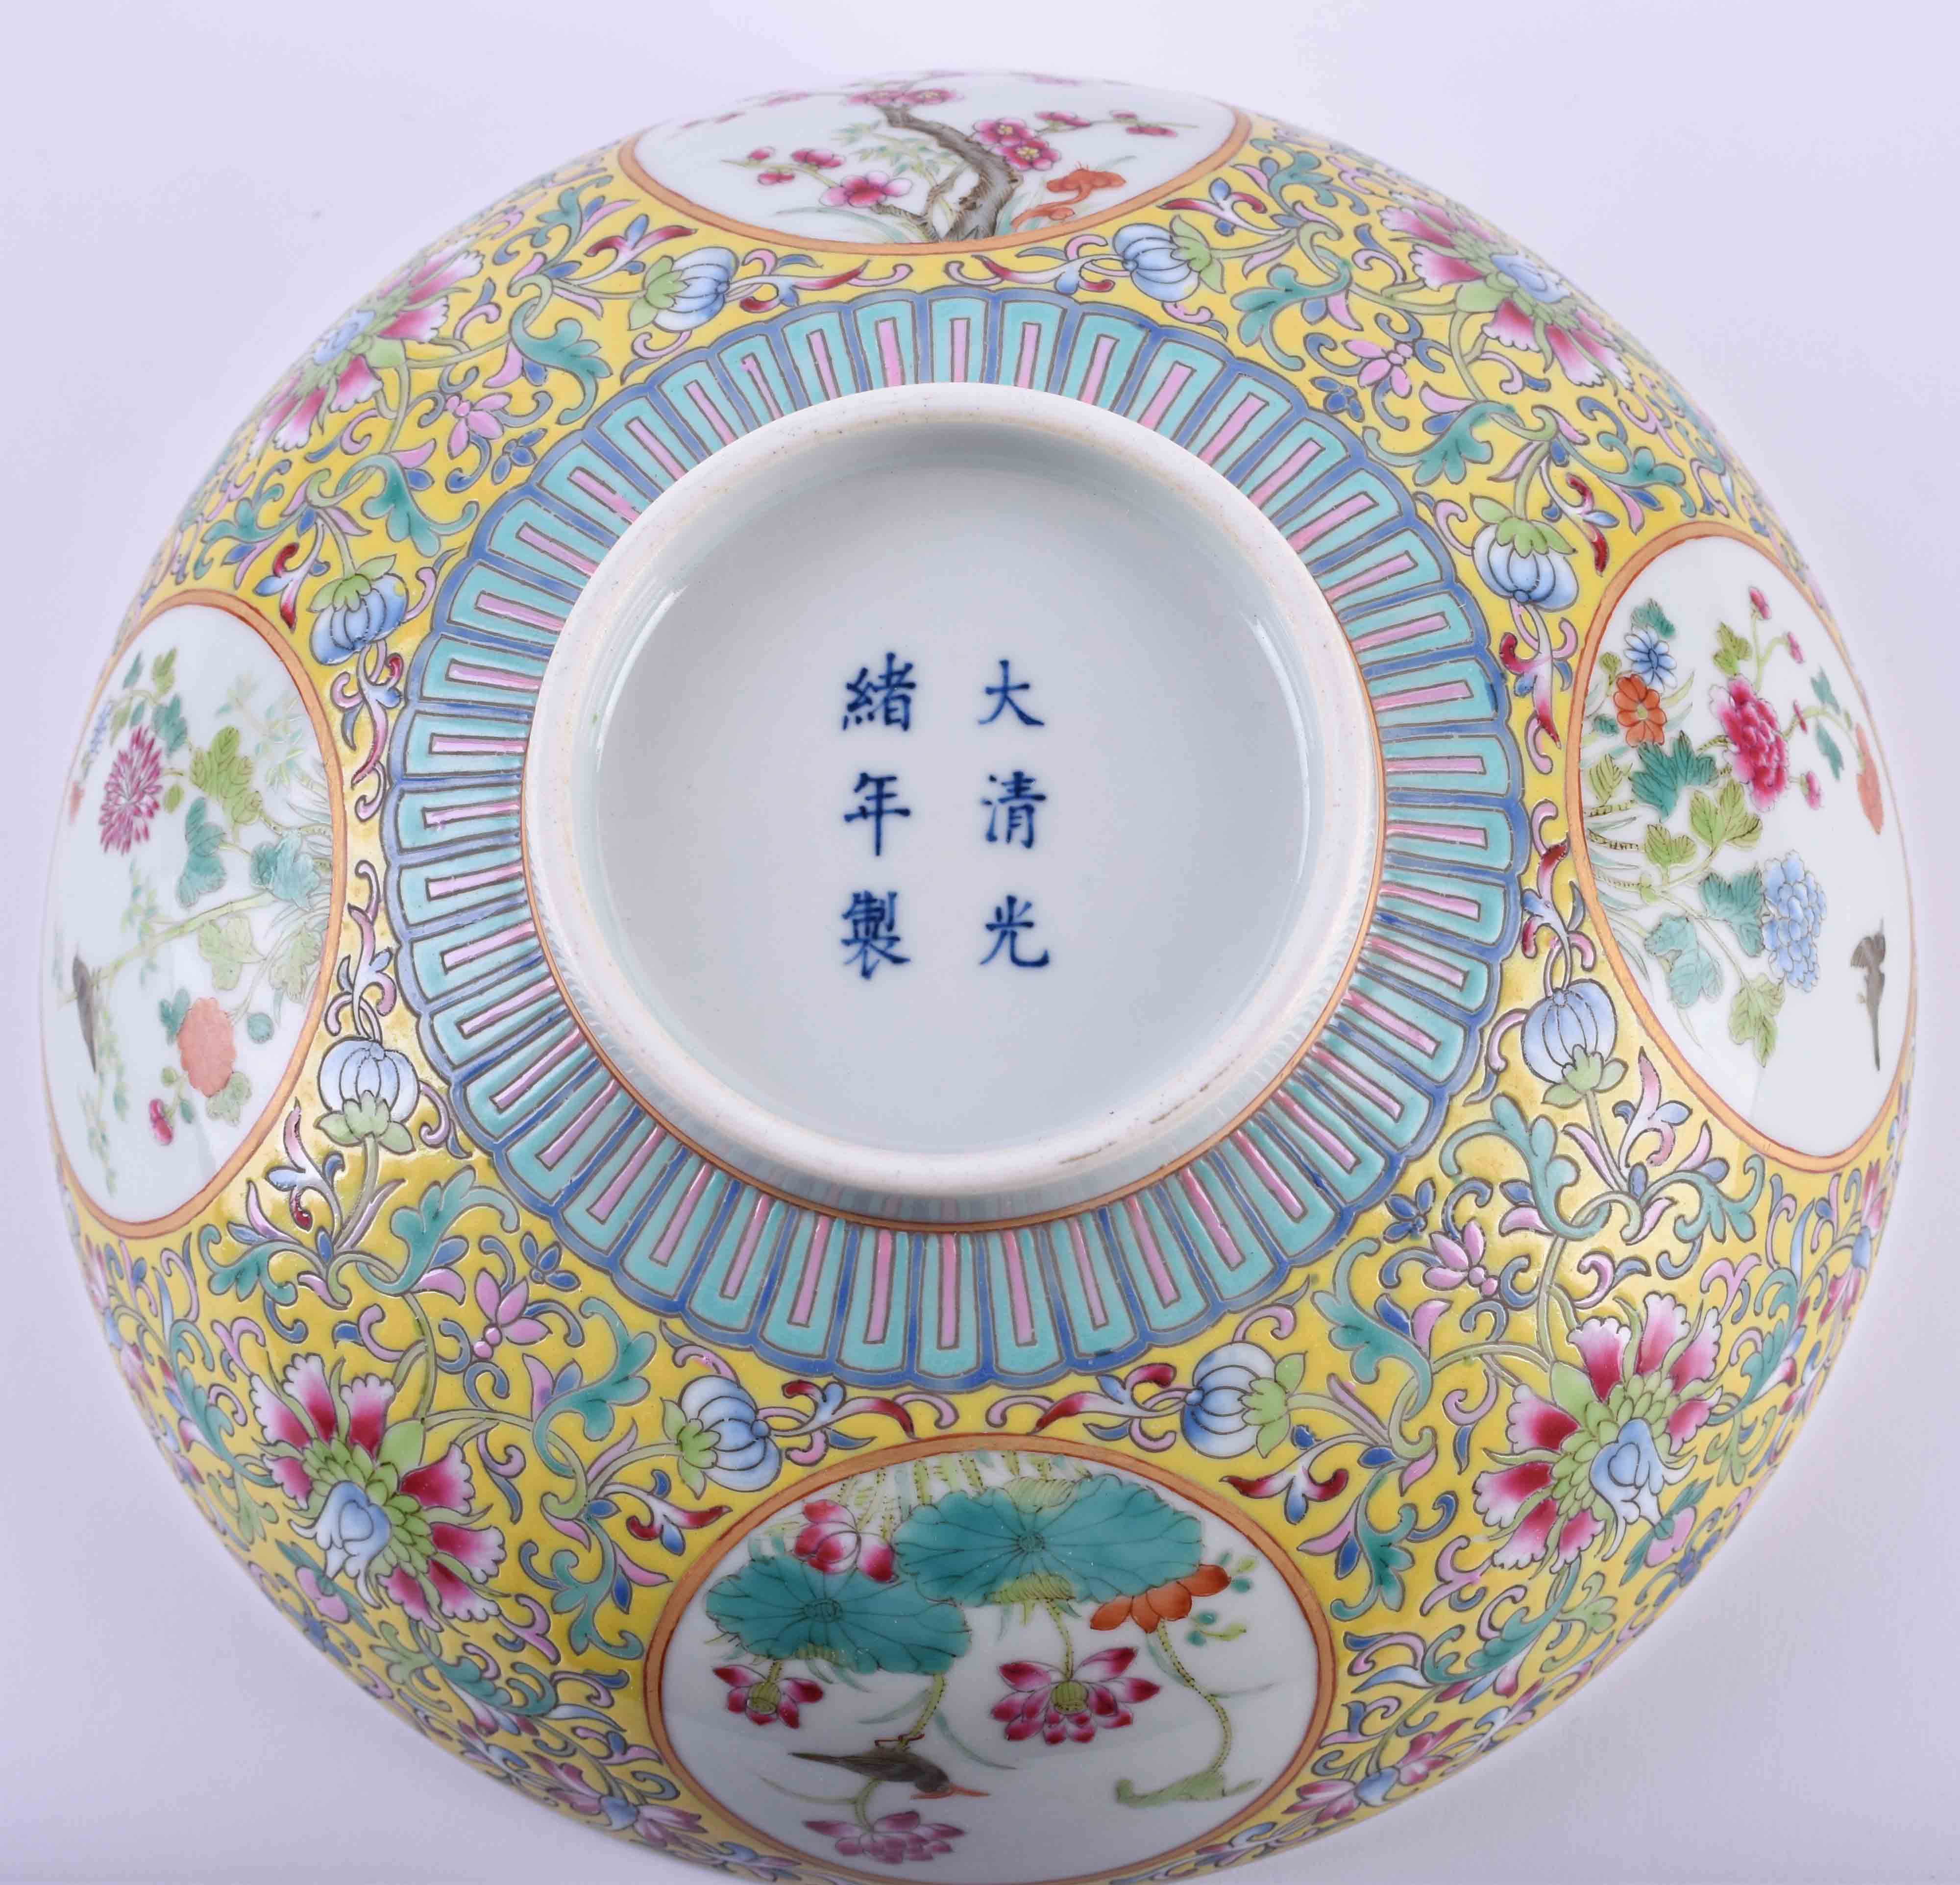  Famille rose bowl late Qing dynasty - Image 11 of 12